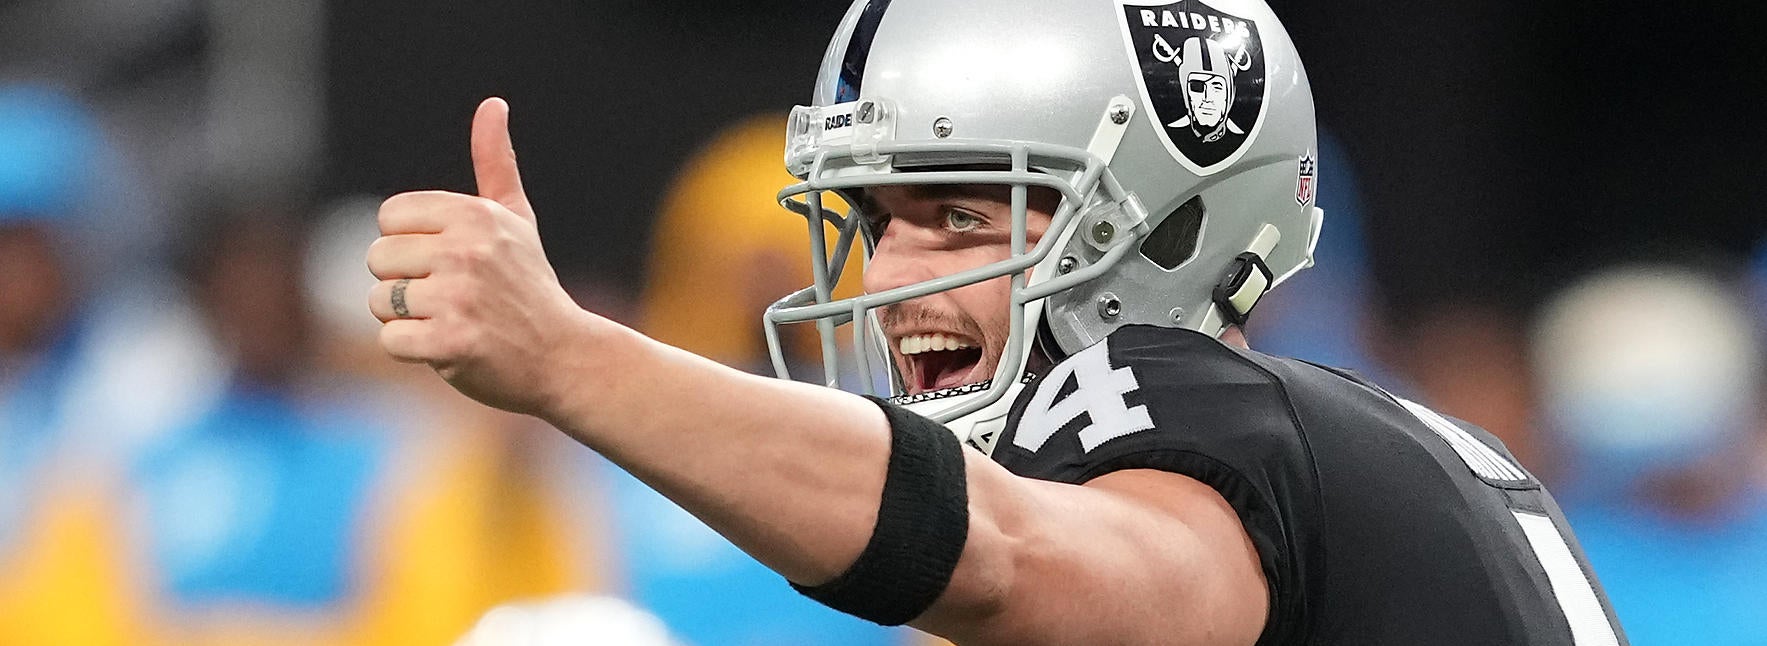 NFL Week 15 picks: Raiders top Patriots, and more against the spread best bets from Las Vegas SuperContest expert